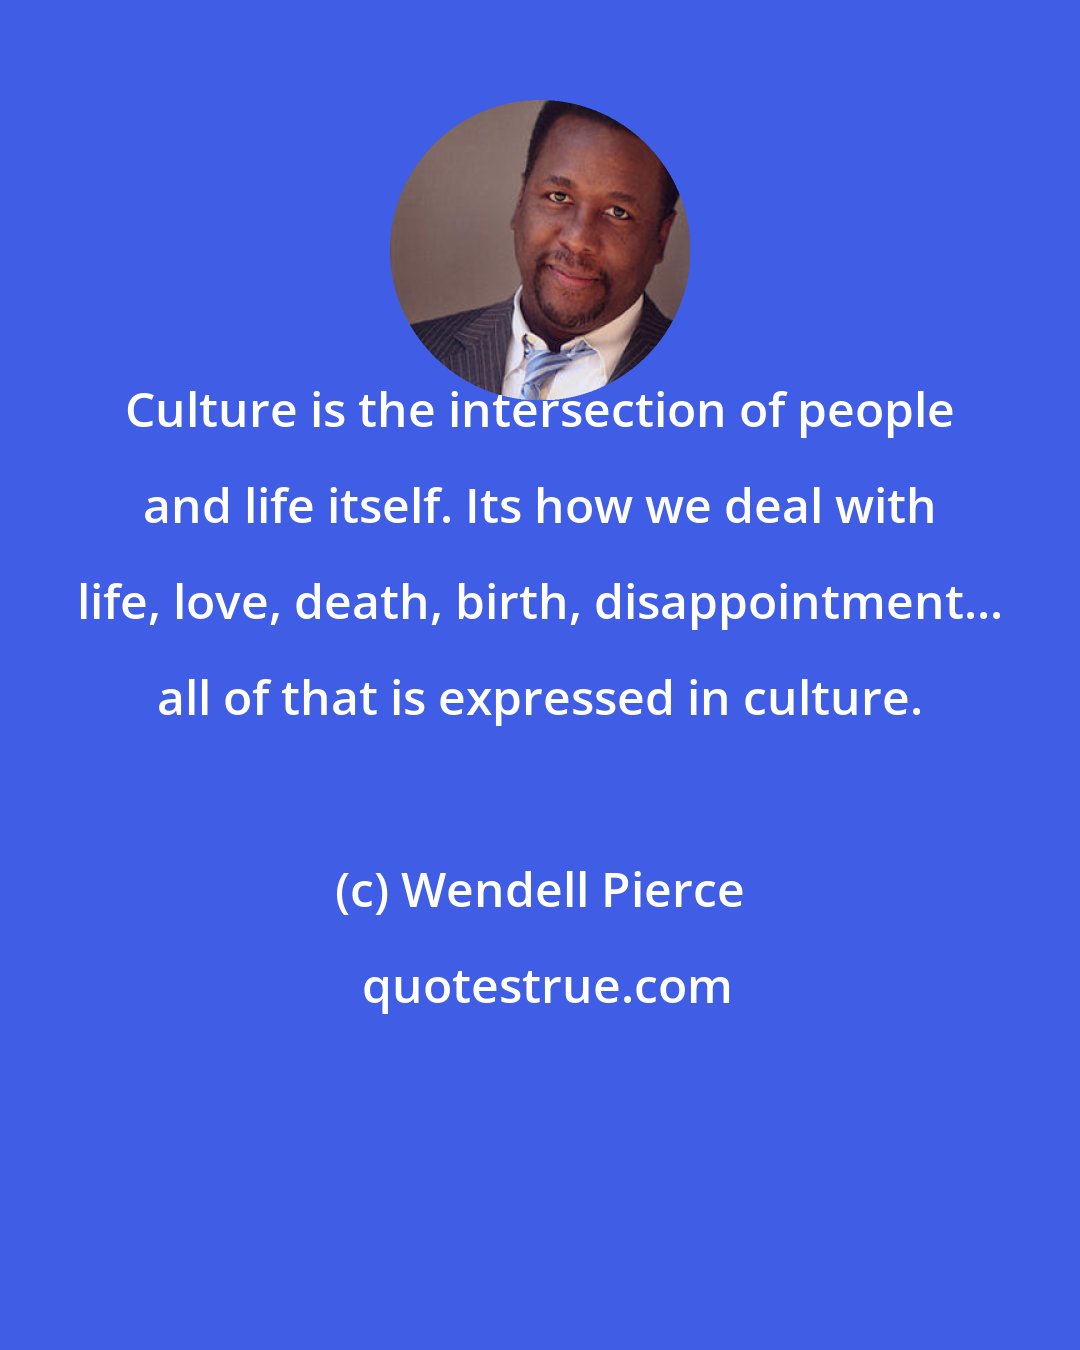 Wendell Pierce: Culture is the intersection of people and life itself. Its how we deal with life, love, death, birth, disappointment... all of that is expressed in culture.